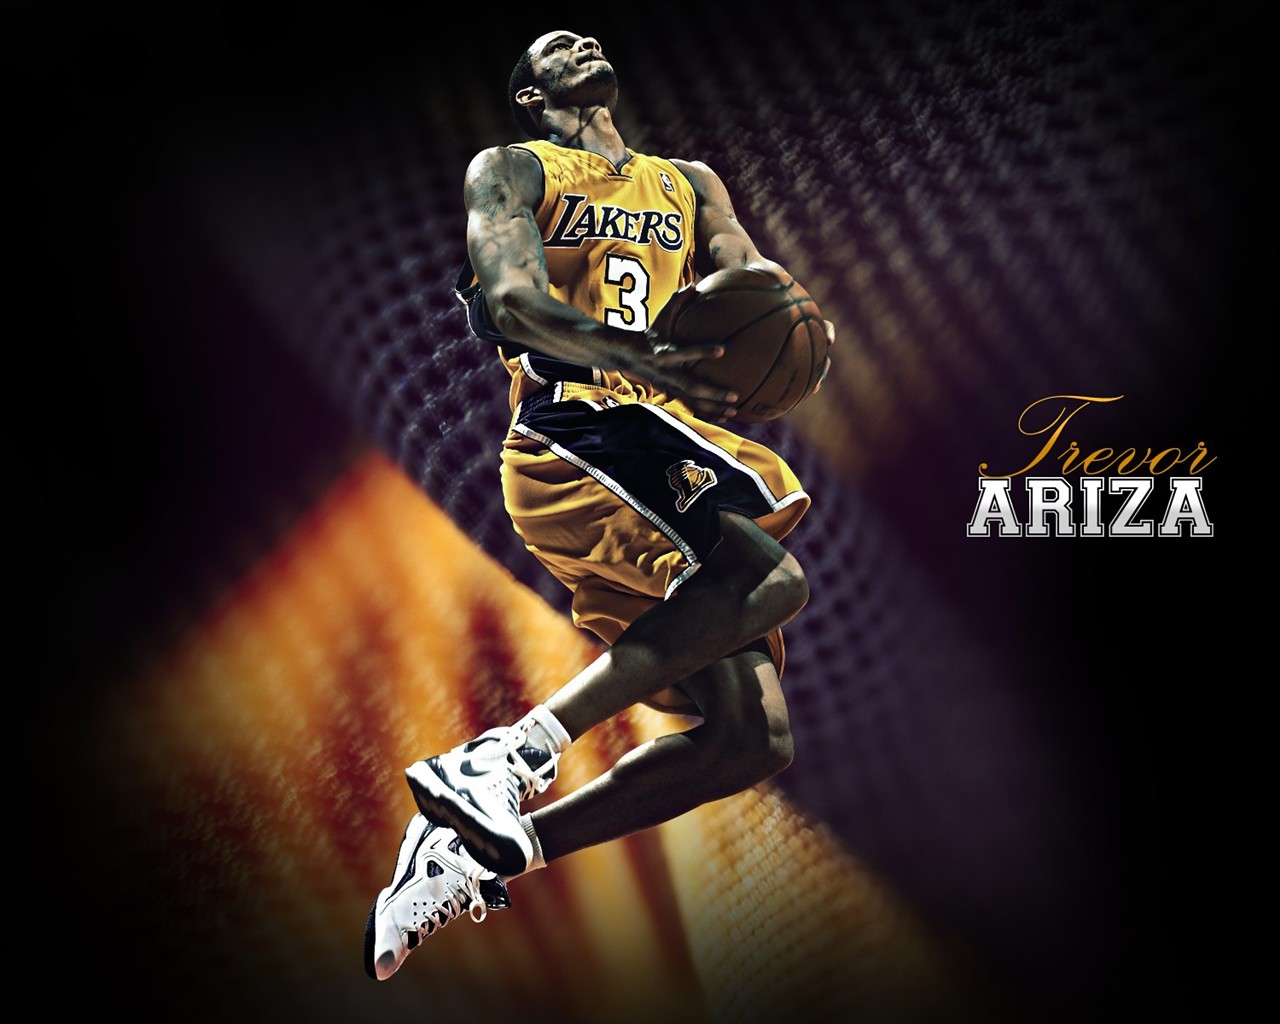 Los Angeles Lakers Wallpaper Oficial #26 - 1280x1024